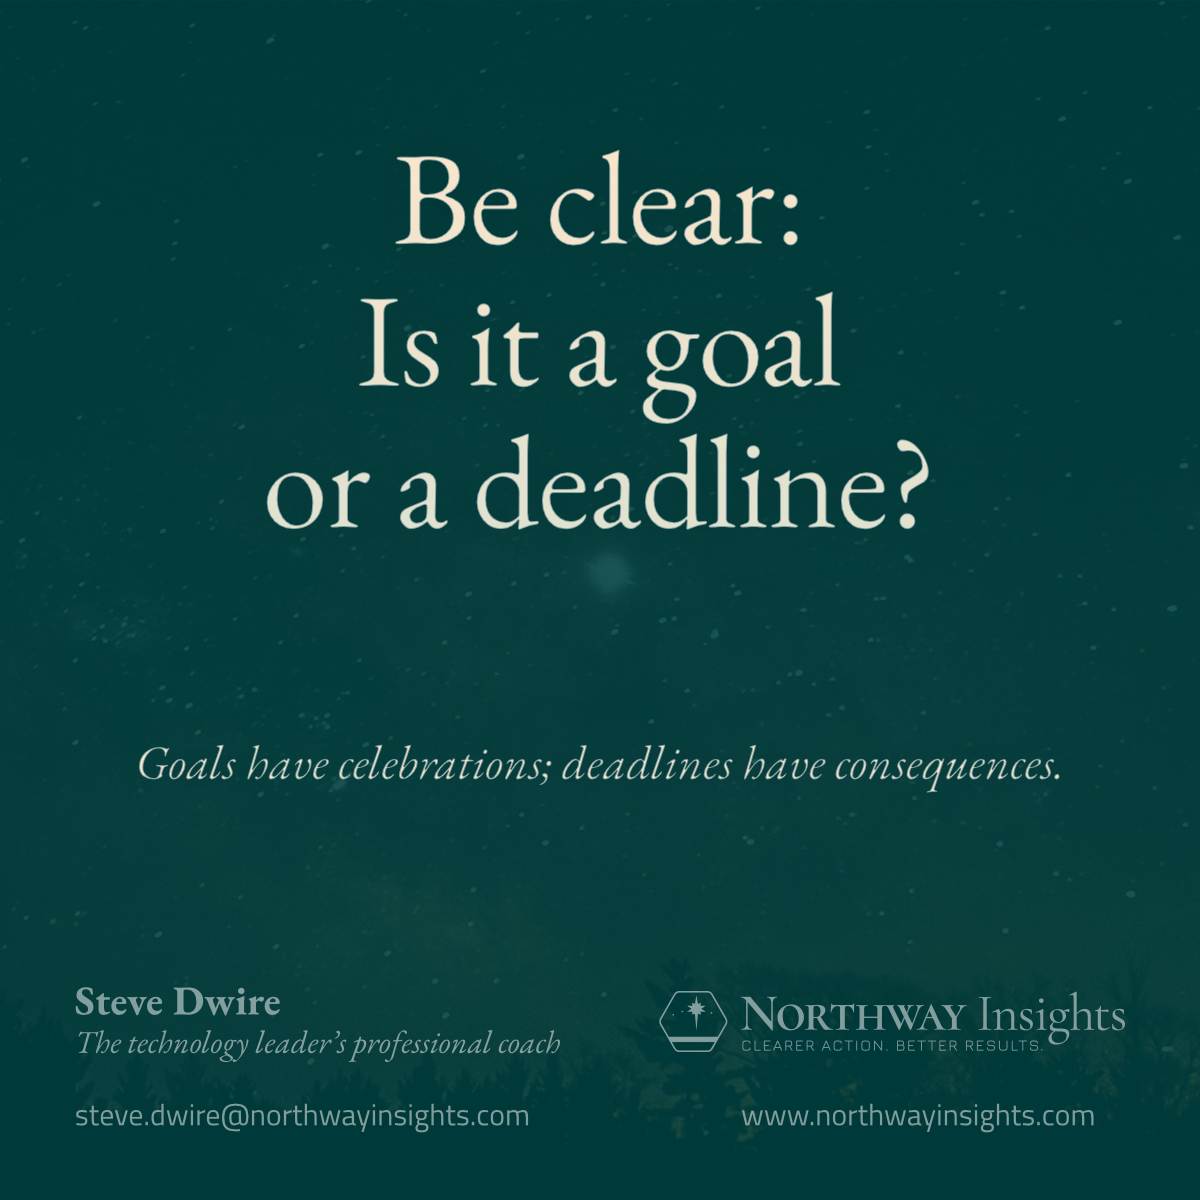 Be clear: Is it a goal or a deadline?